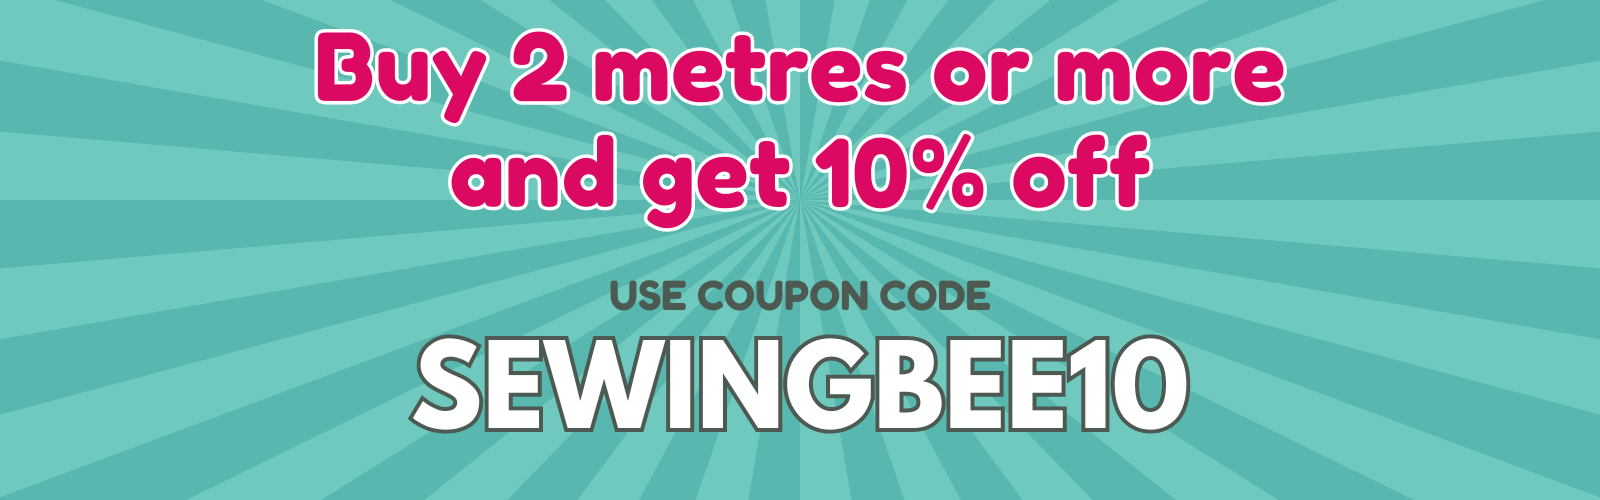 get 10% off your order when you buy 2 metre or more fabric with coupon code SEWINGBEE10